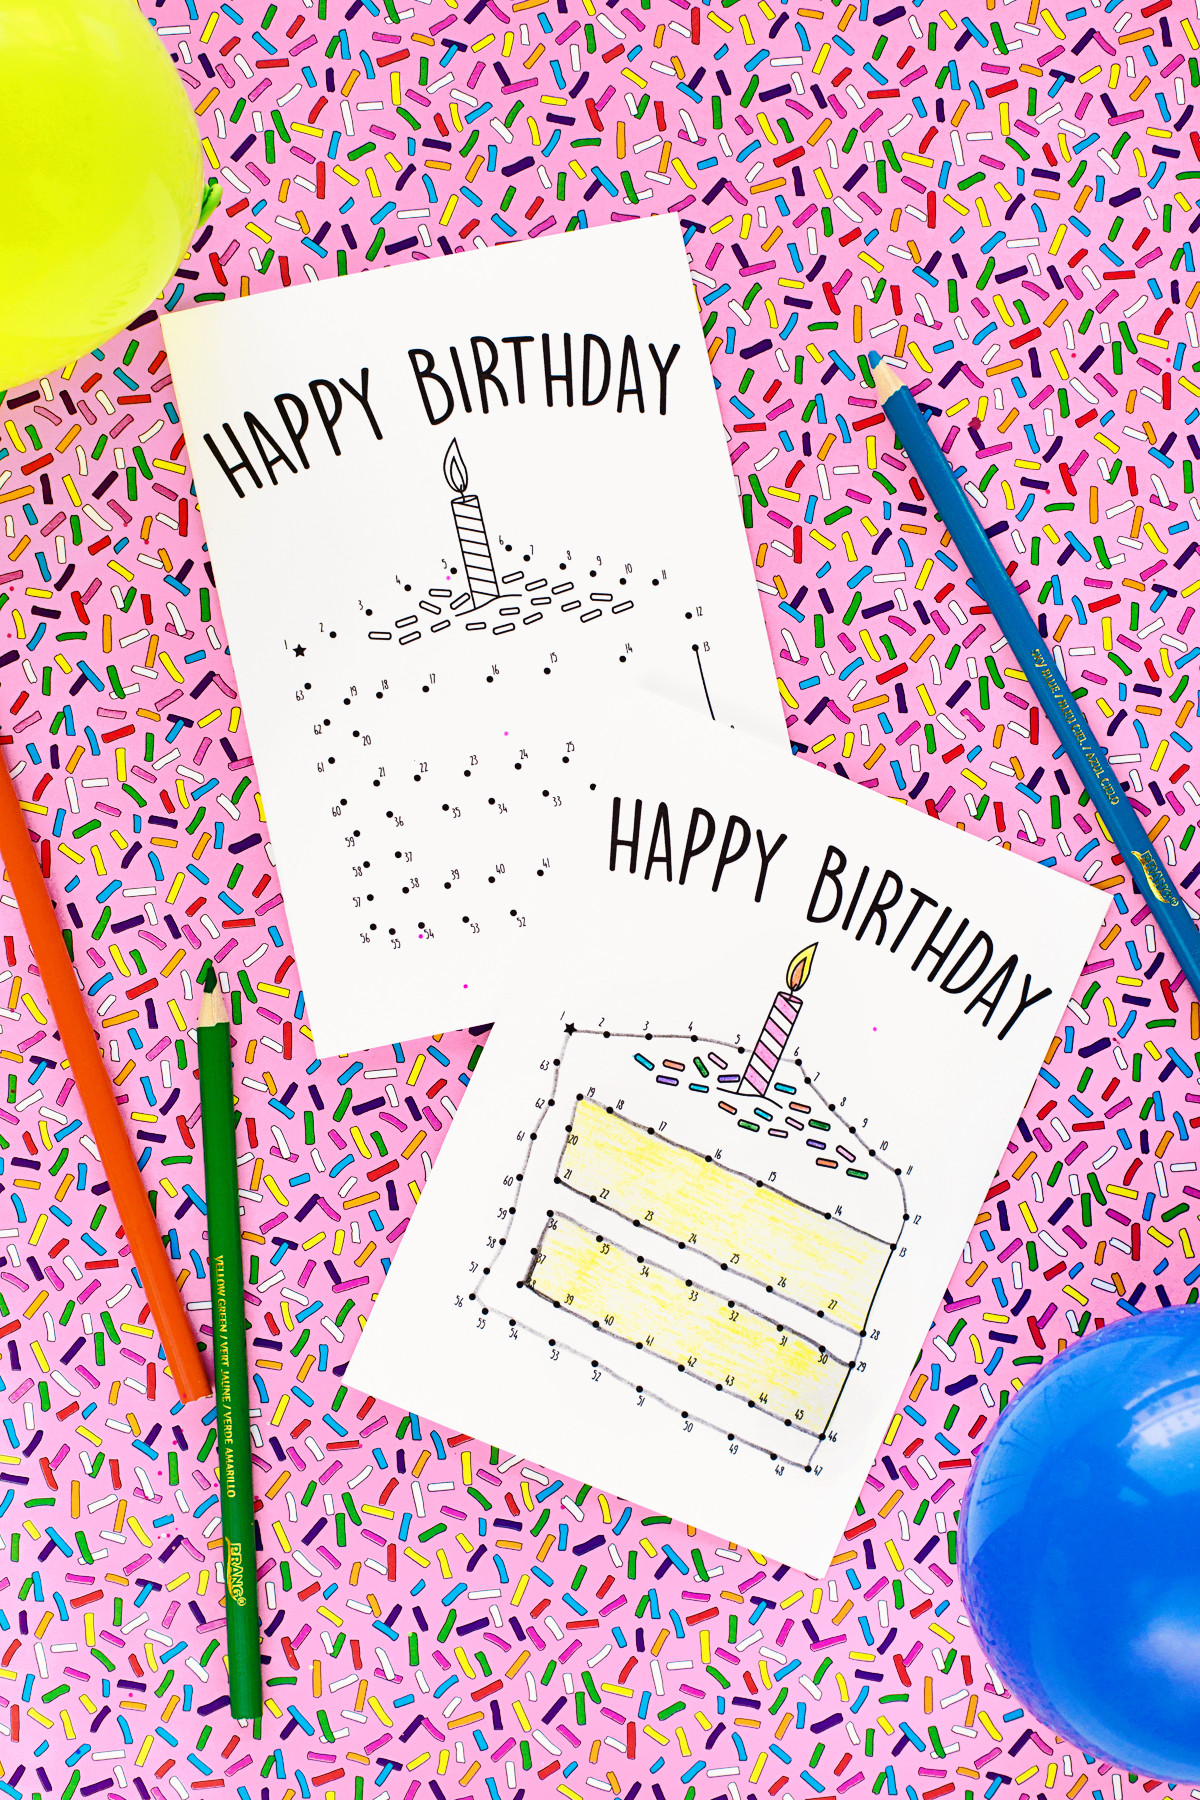 Free Printable Birthday Cards For Kids
 Free Printable Birthday Cards for Kids Studio DIY